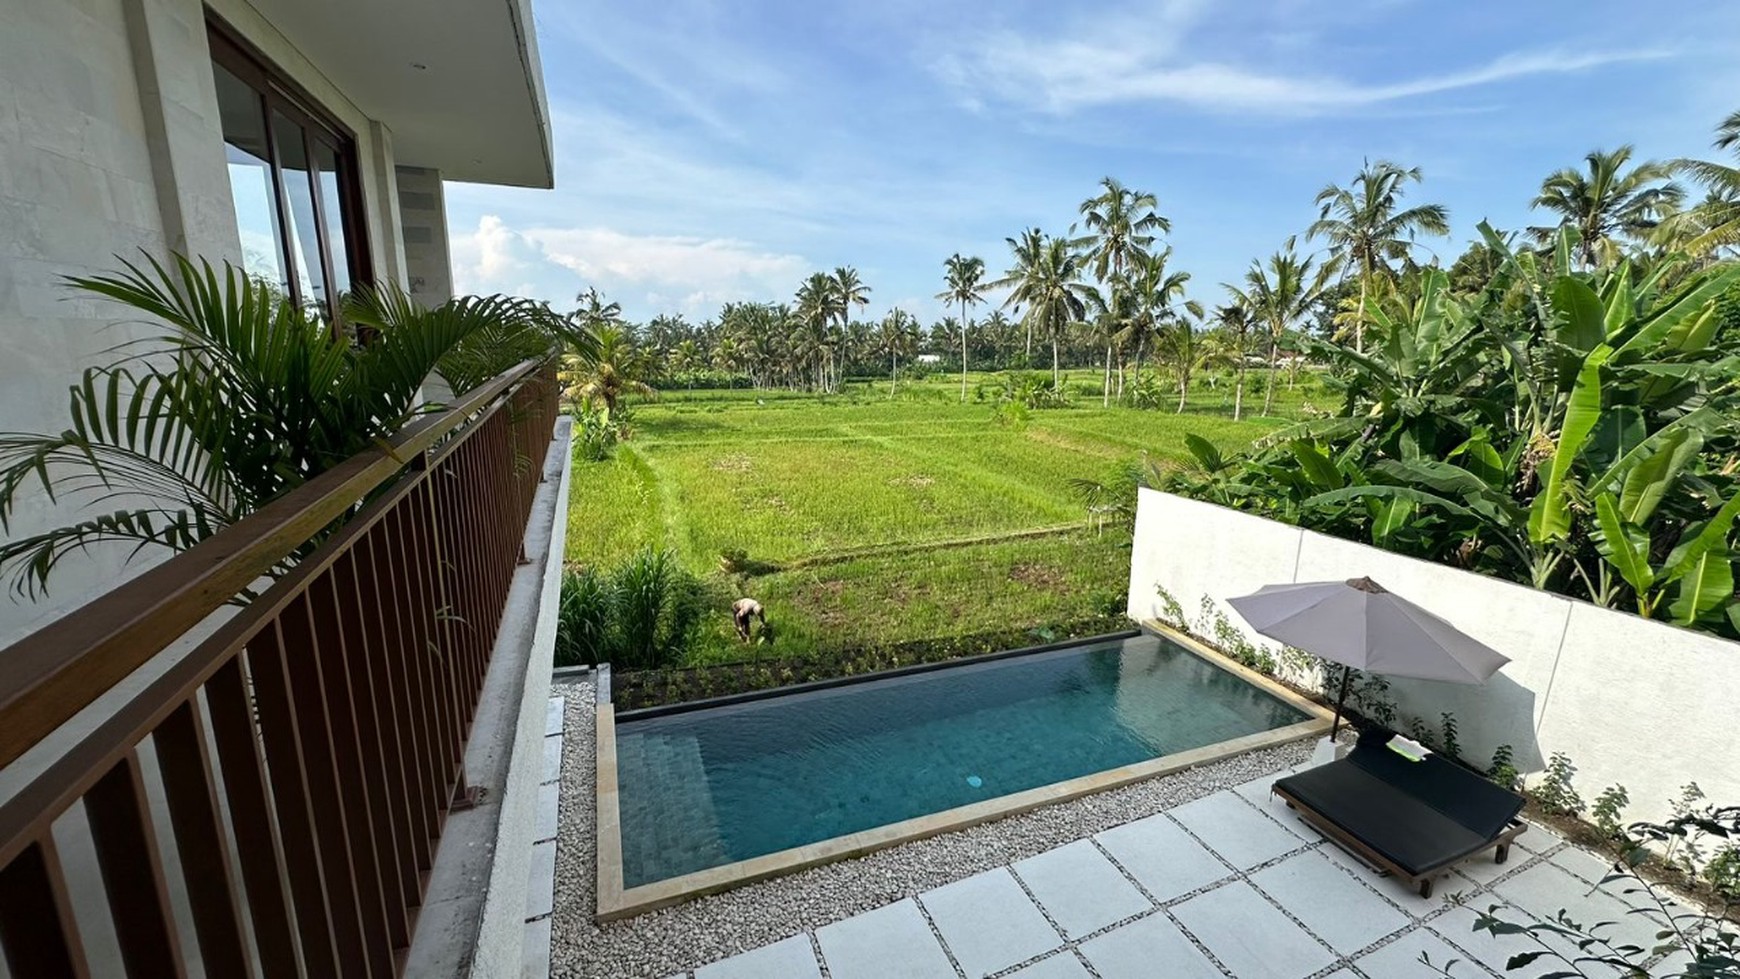 Modern and Stunning 5 Bedroom Freehold Villa with Beautiful Rice Field Views in Ubud